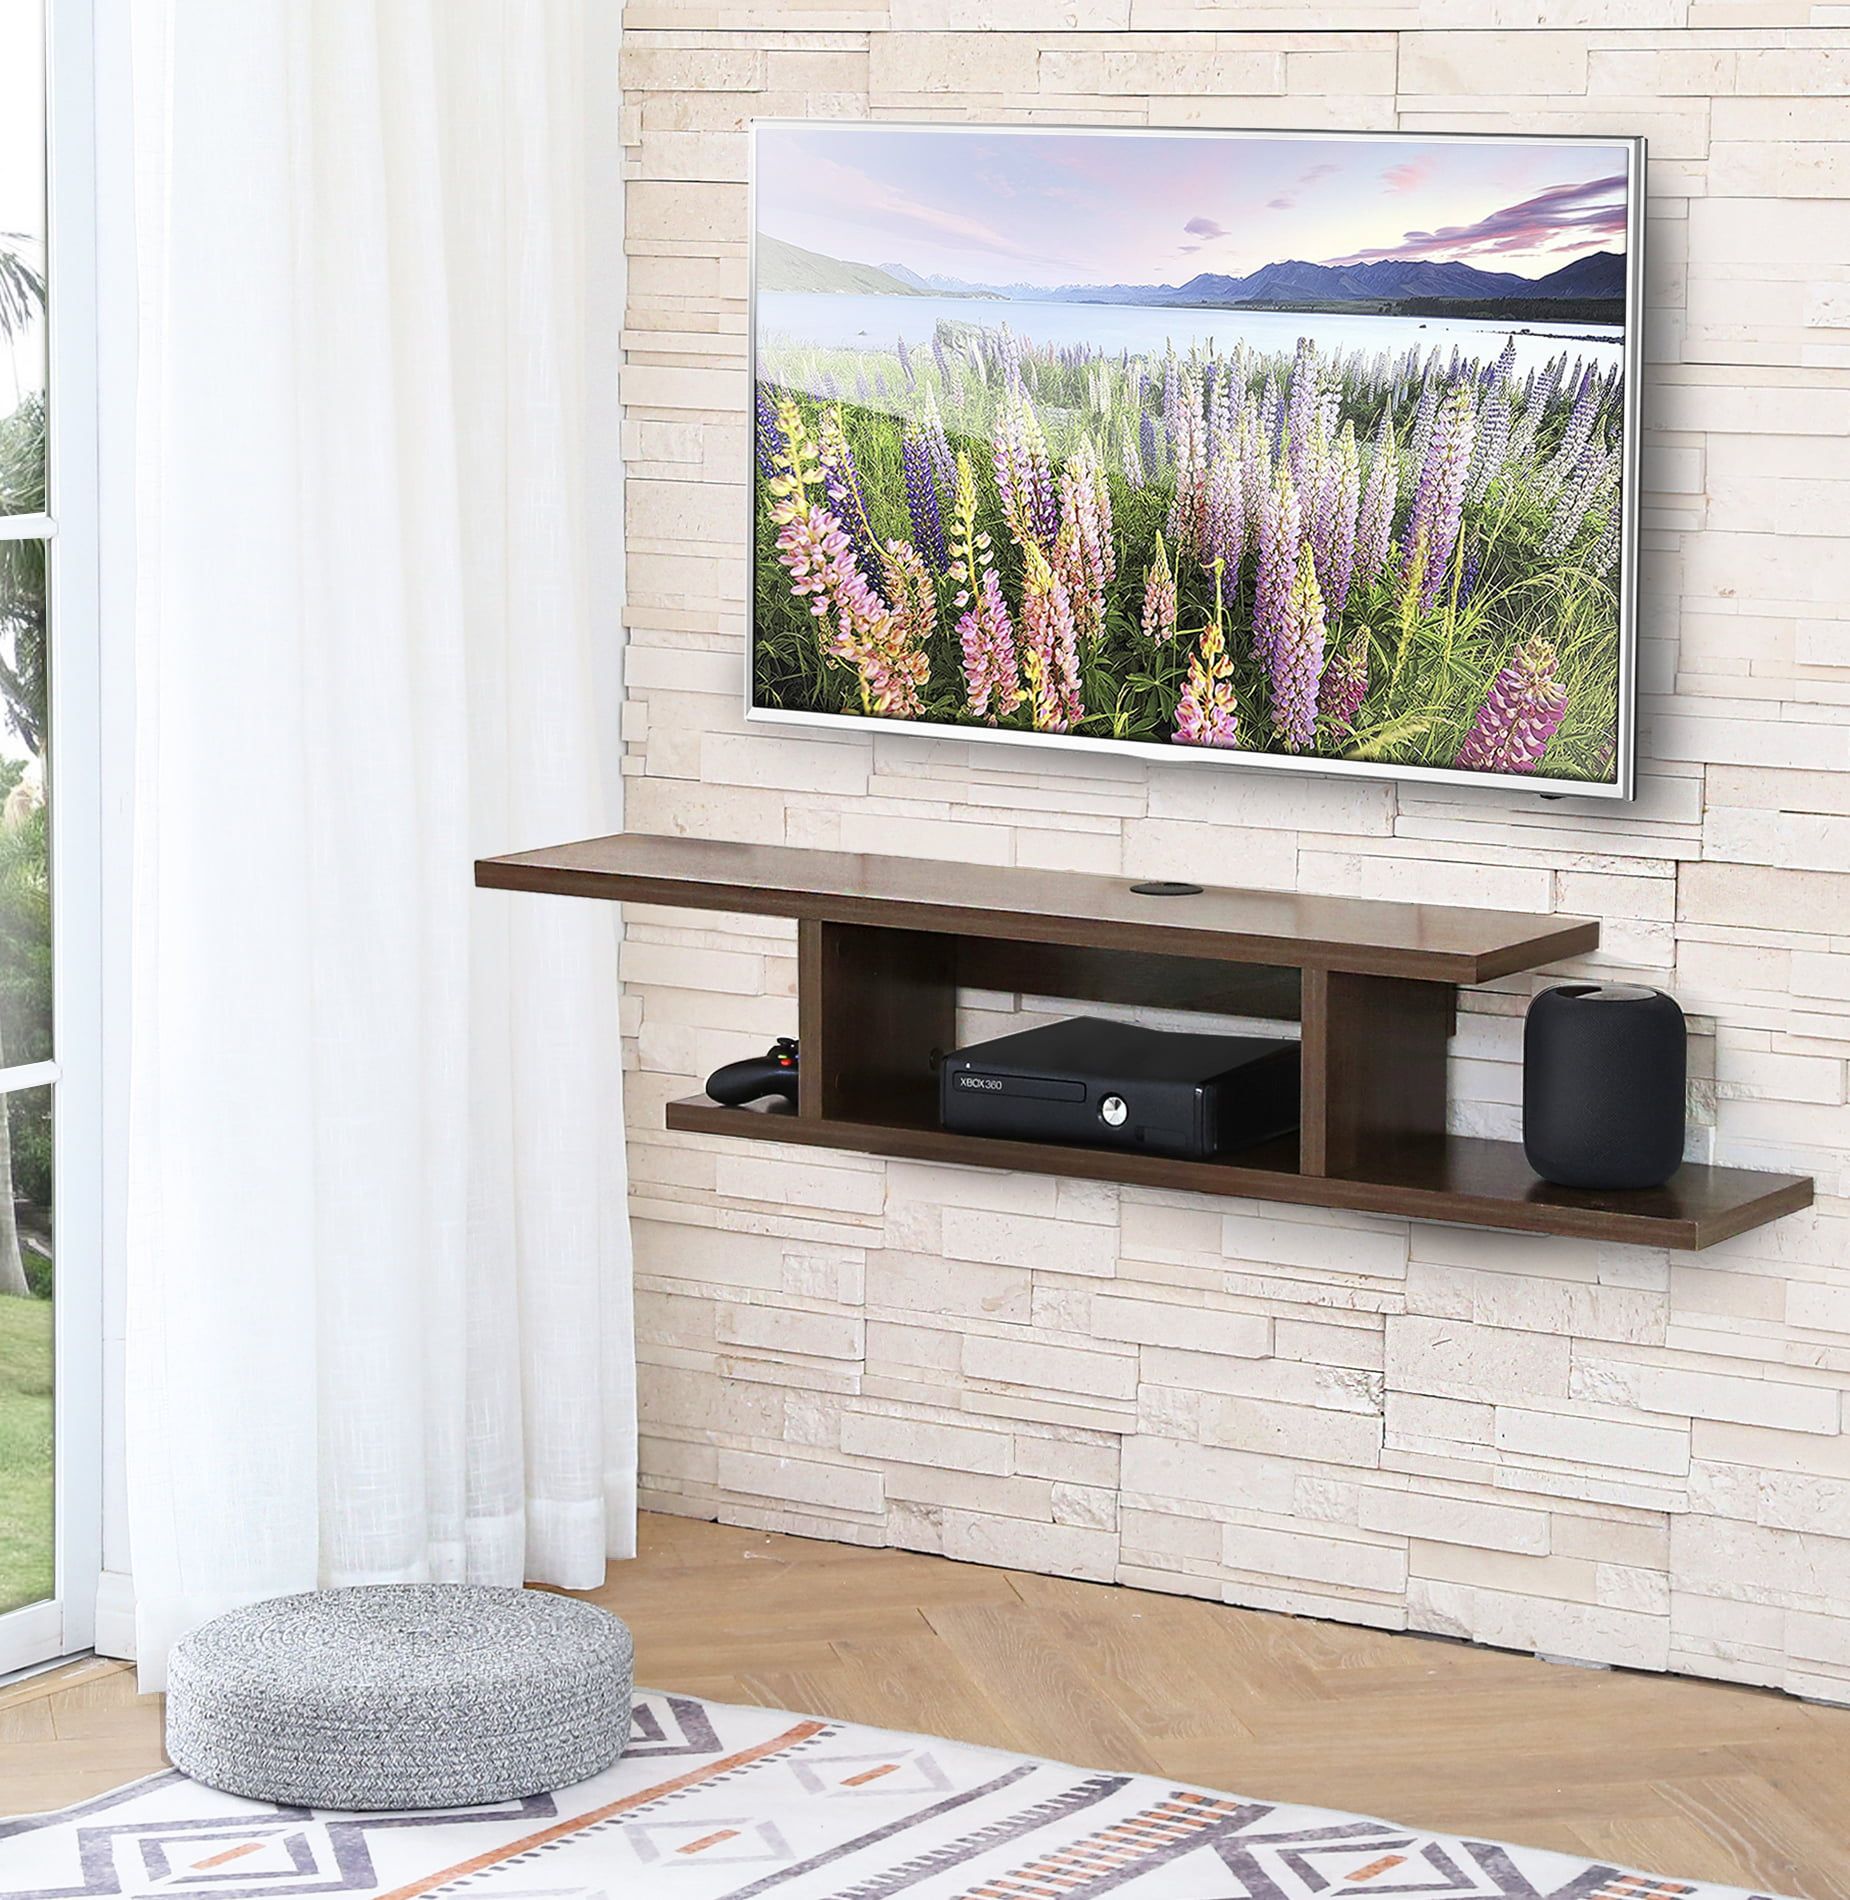 Fitueyes Floating Wall Mounted Tv Console Storage Shelf Modern Tv Stand Within Wall Mounted Floating Tv Stands (View 2 of 20)